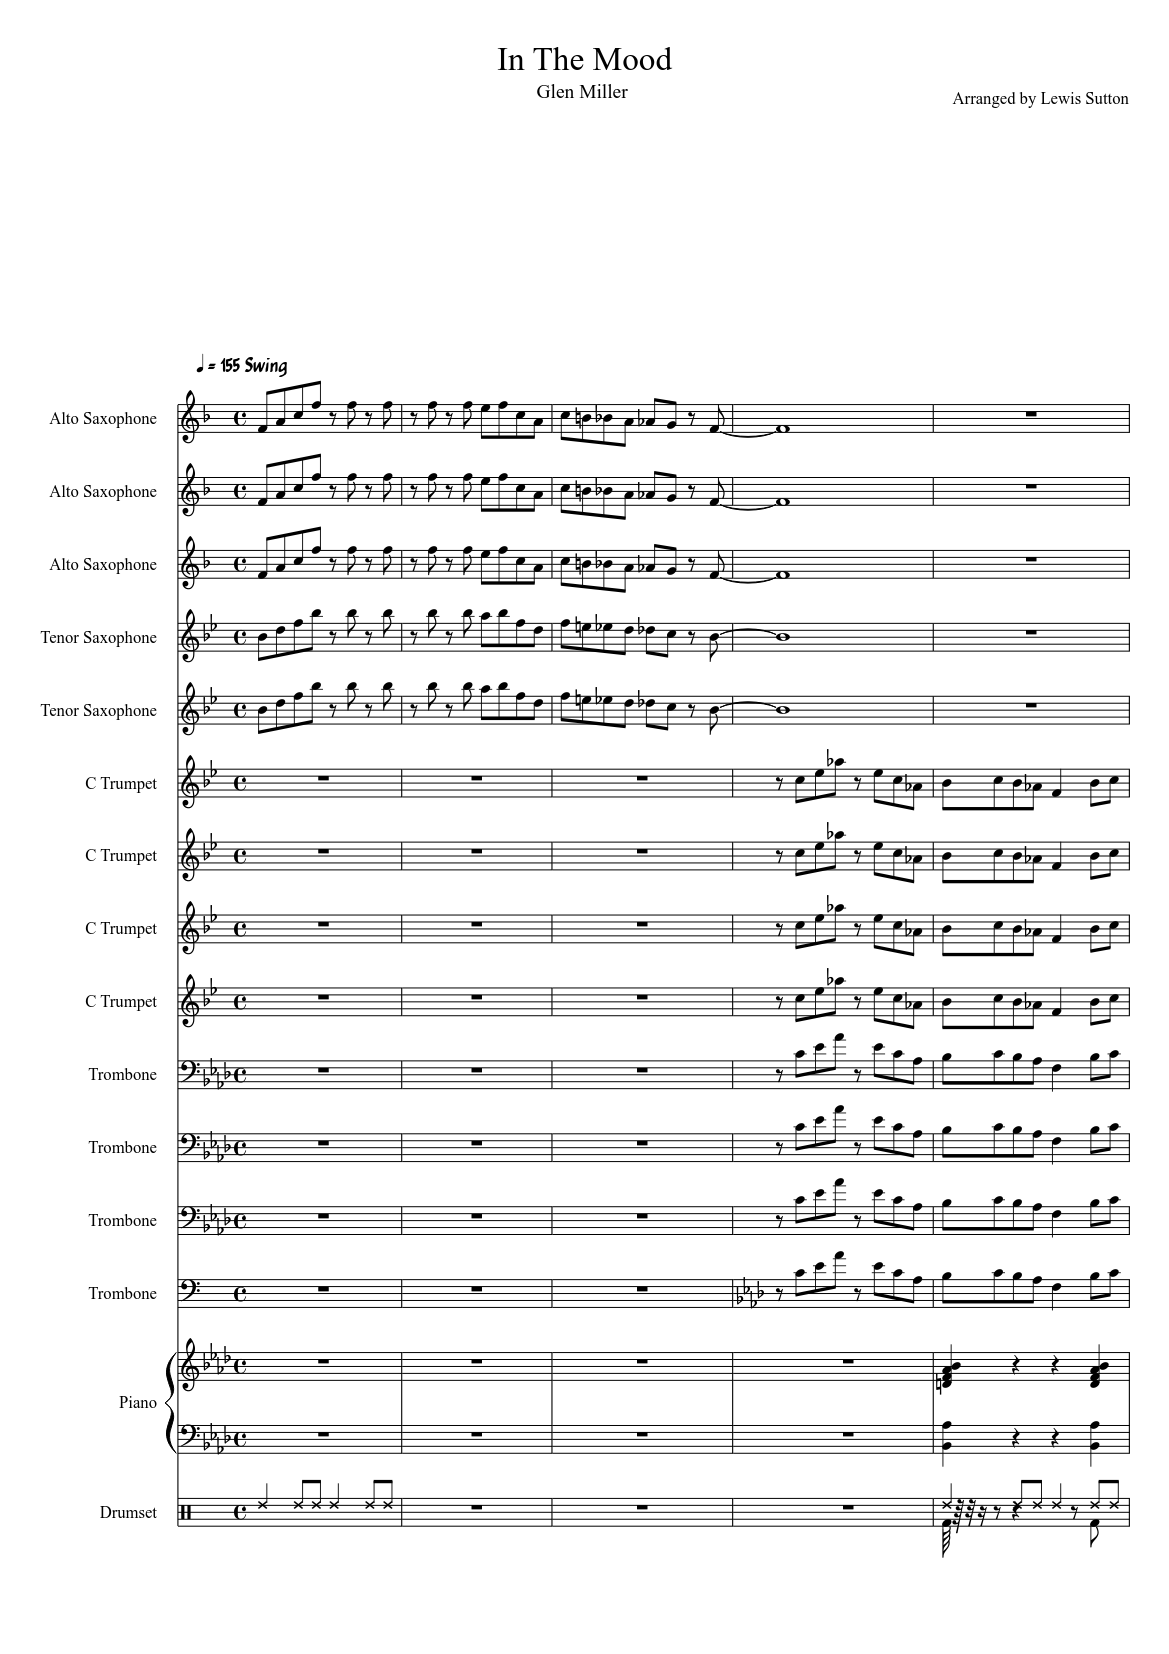 In The Mood - Glen Miller Orchestra Sheet music for Piano, Trombone,  Trumpet other (Mixed Ensemble) | Musescore.com